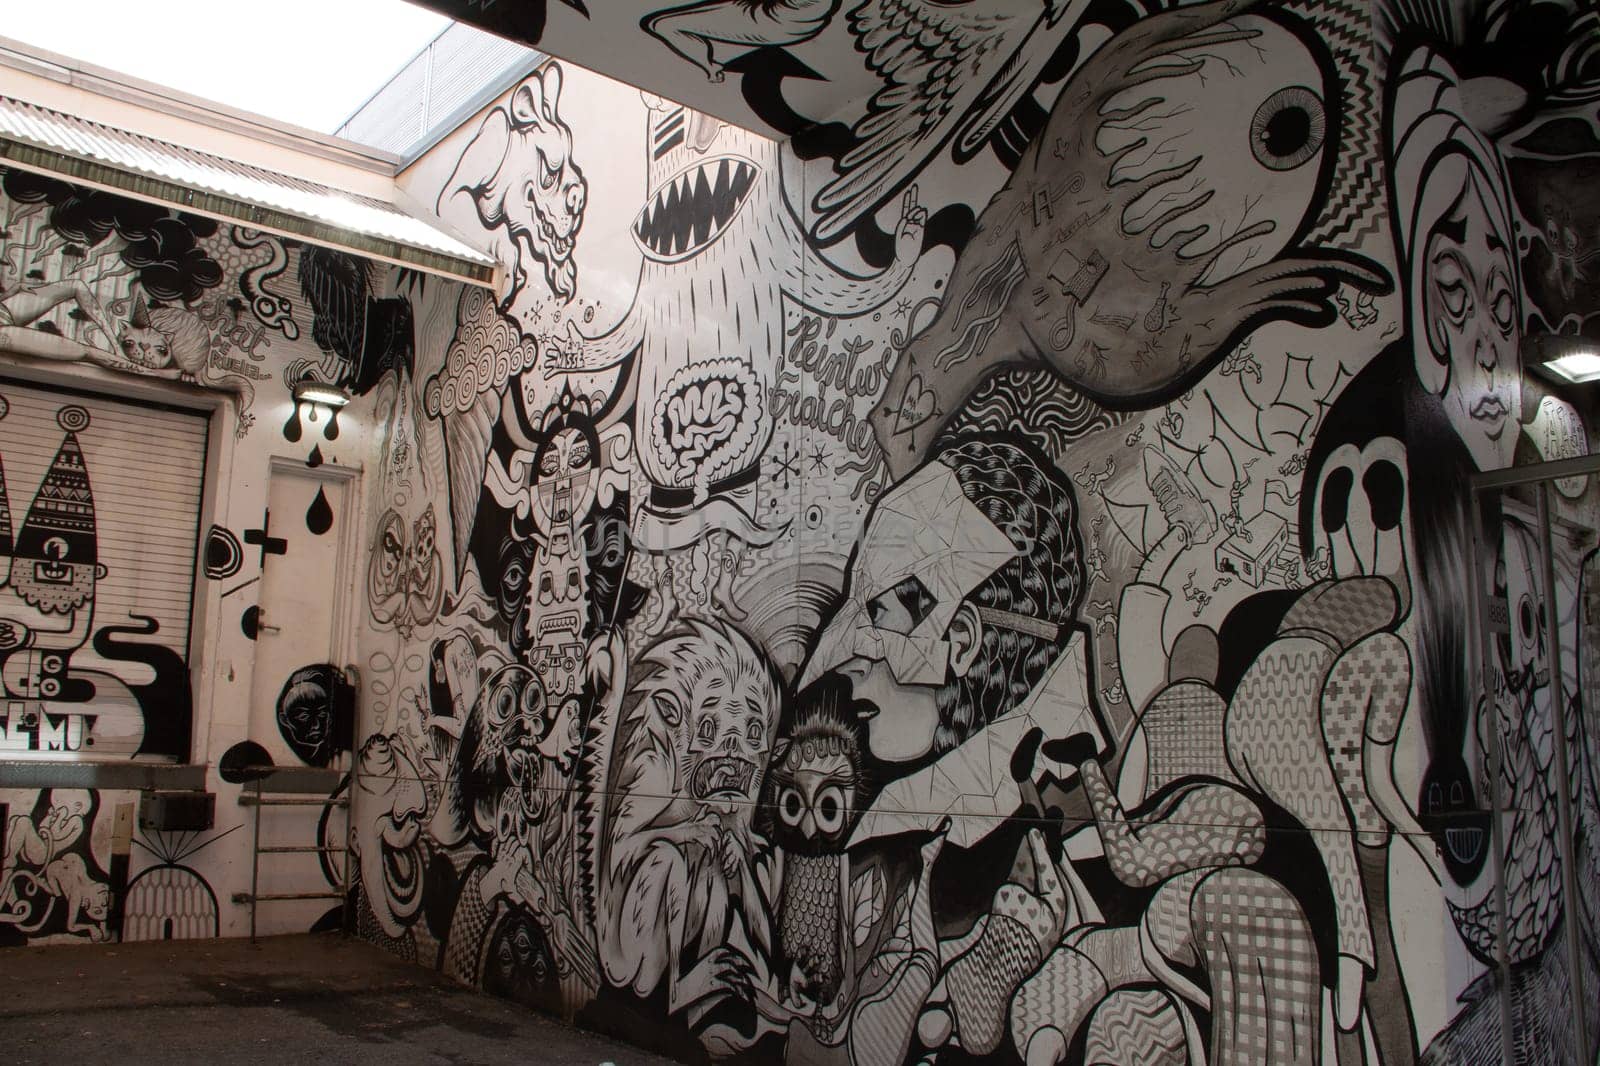 Creative black and white graffiti street art mural lining the street of Montreal, city of Quebec, Canada